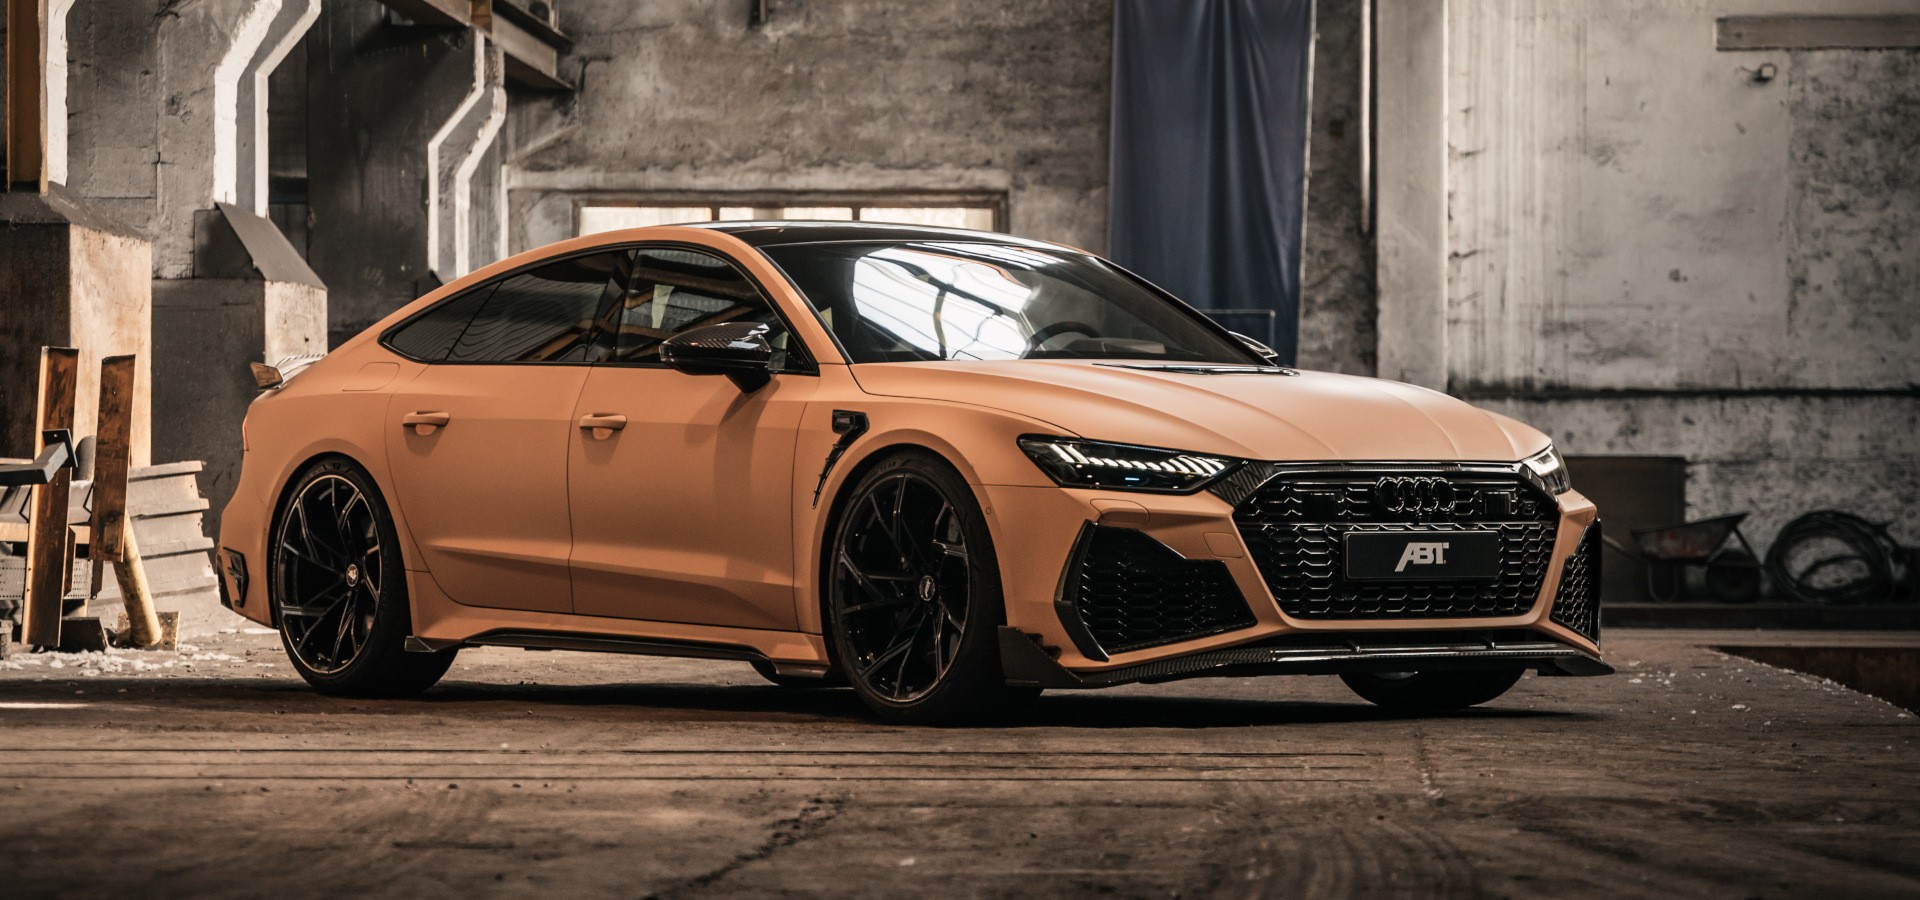 0–60 in 2.6s: ABT's Audi RS 7 Makes 1,000 Ethanol-Cooled HP